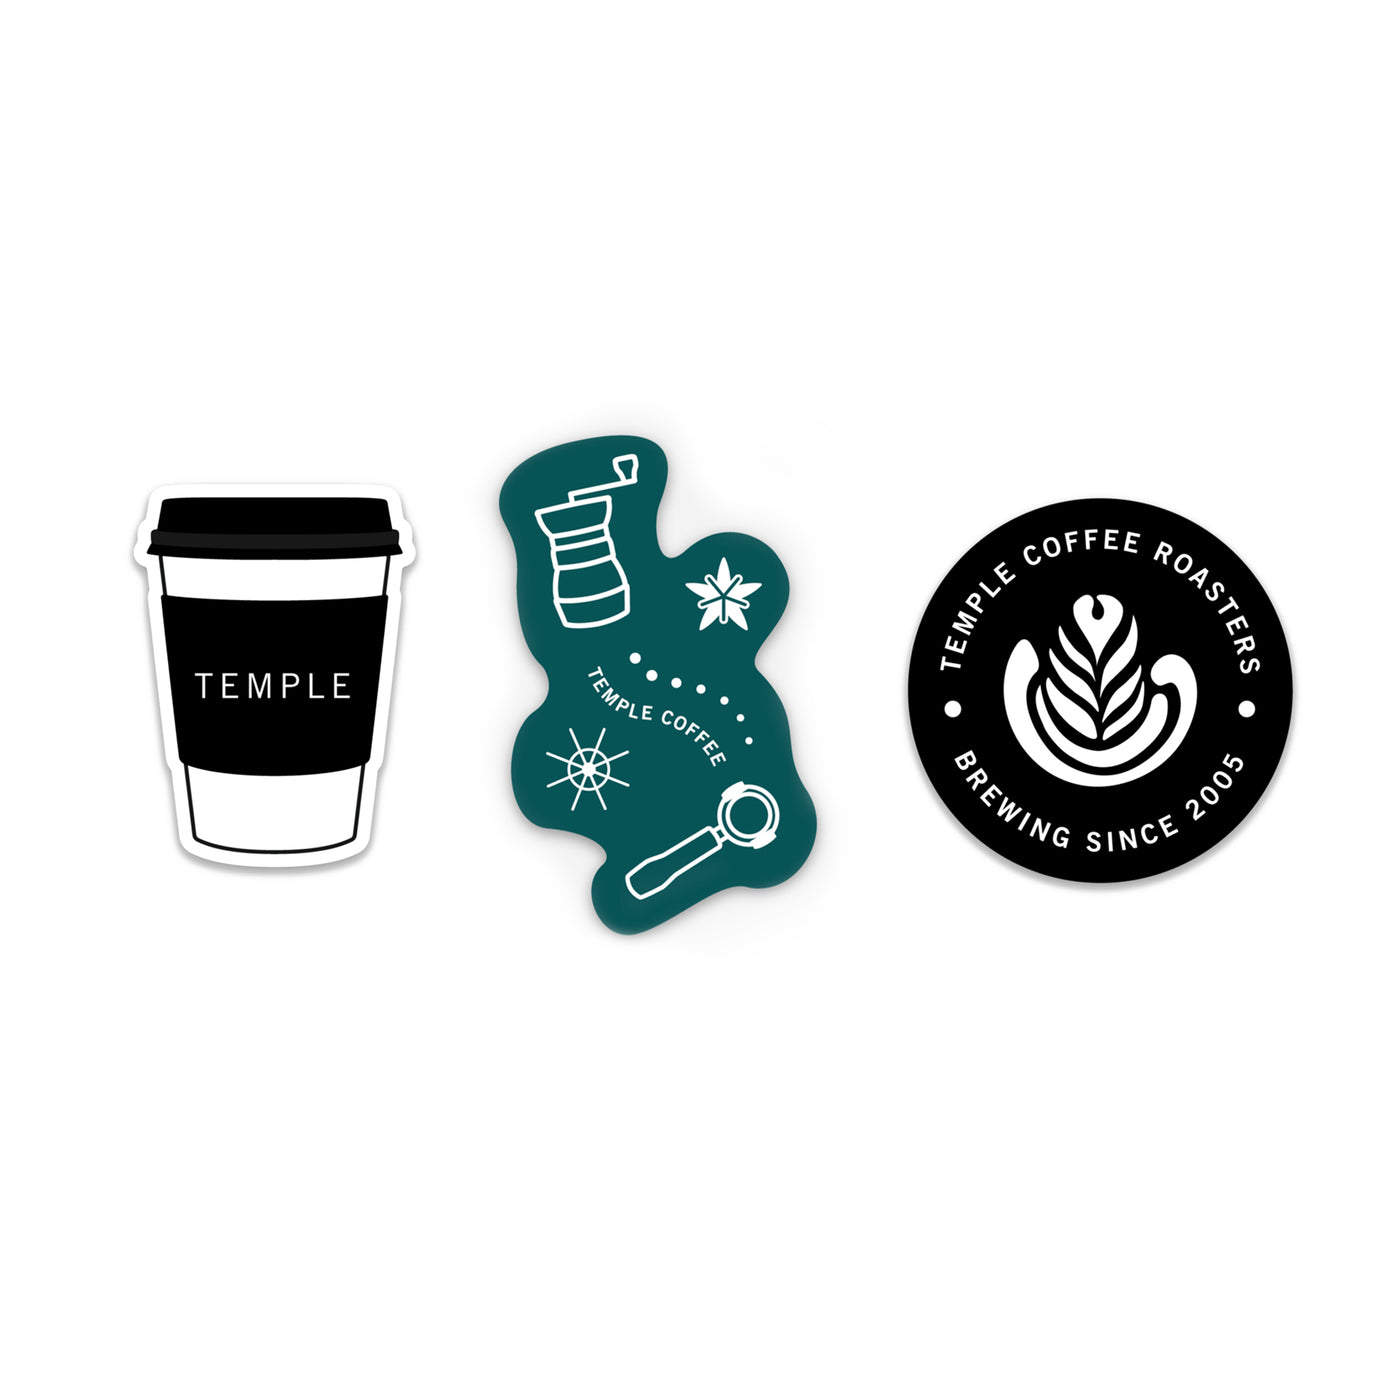 Temple Coffee Magnets